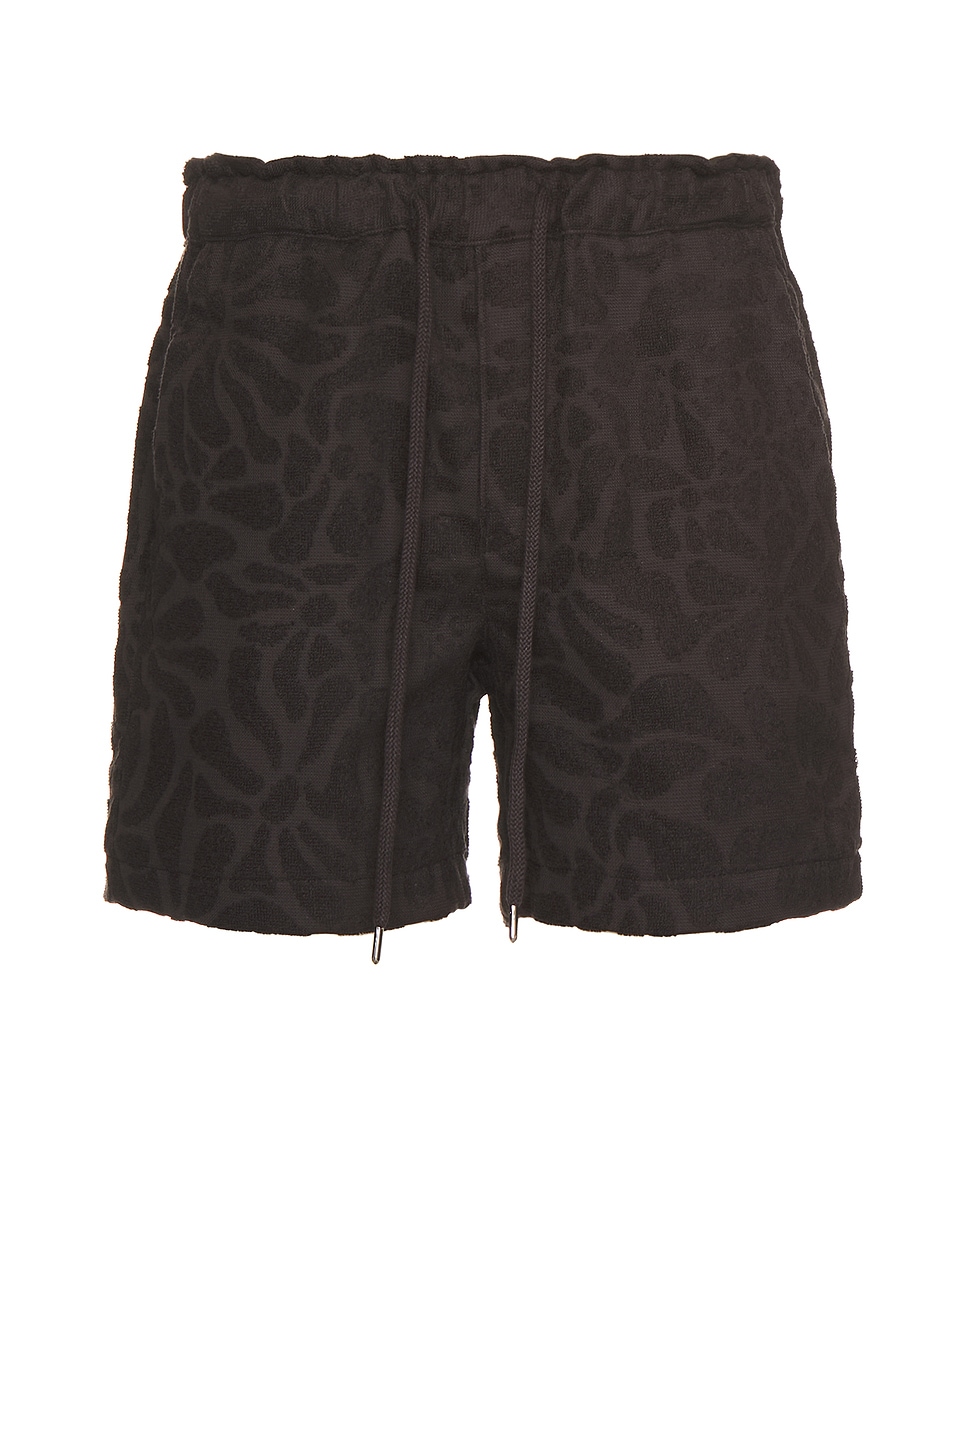 Image 1 of OAS Blossom Terry Short in Brown